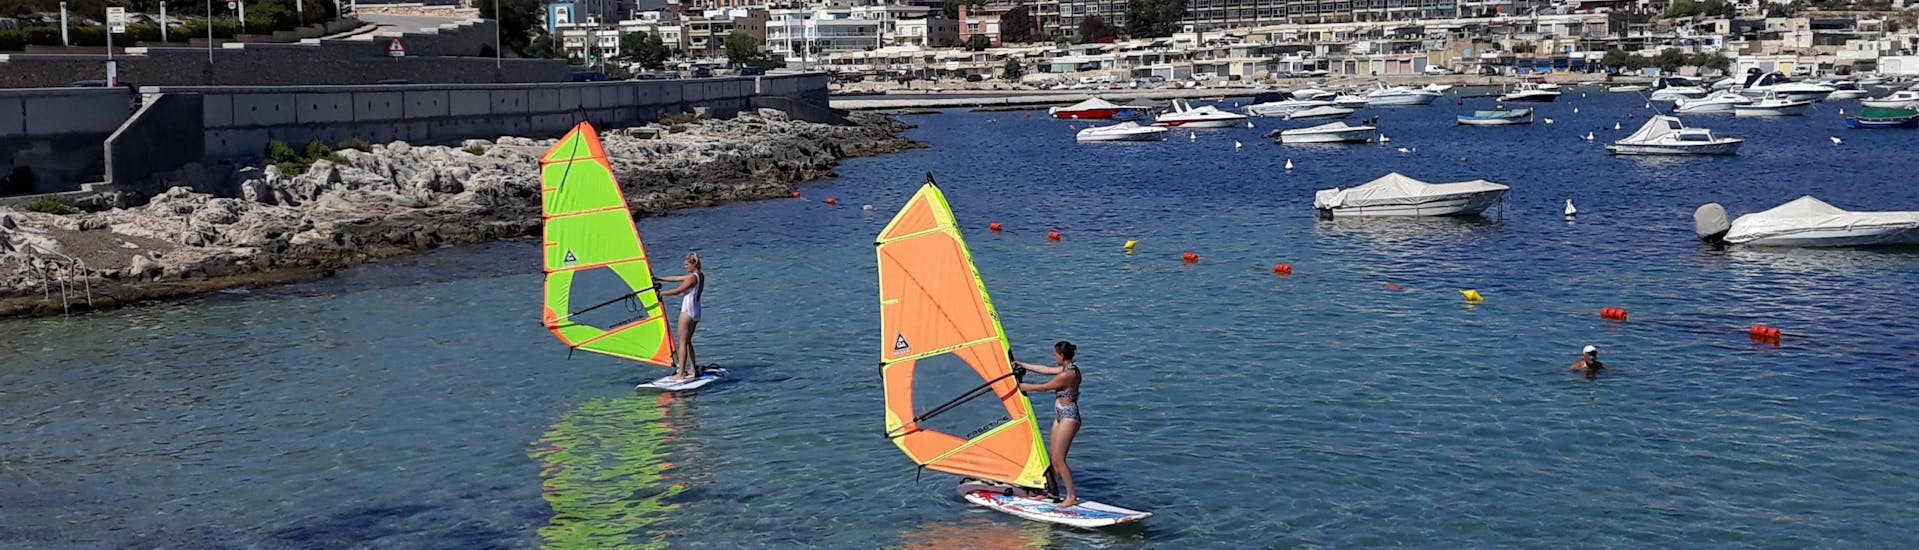 Windsurfing Lessons for Adults - All Levels.